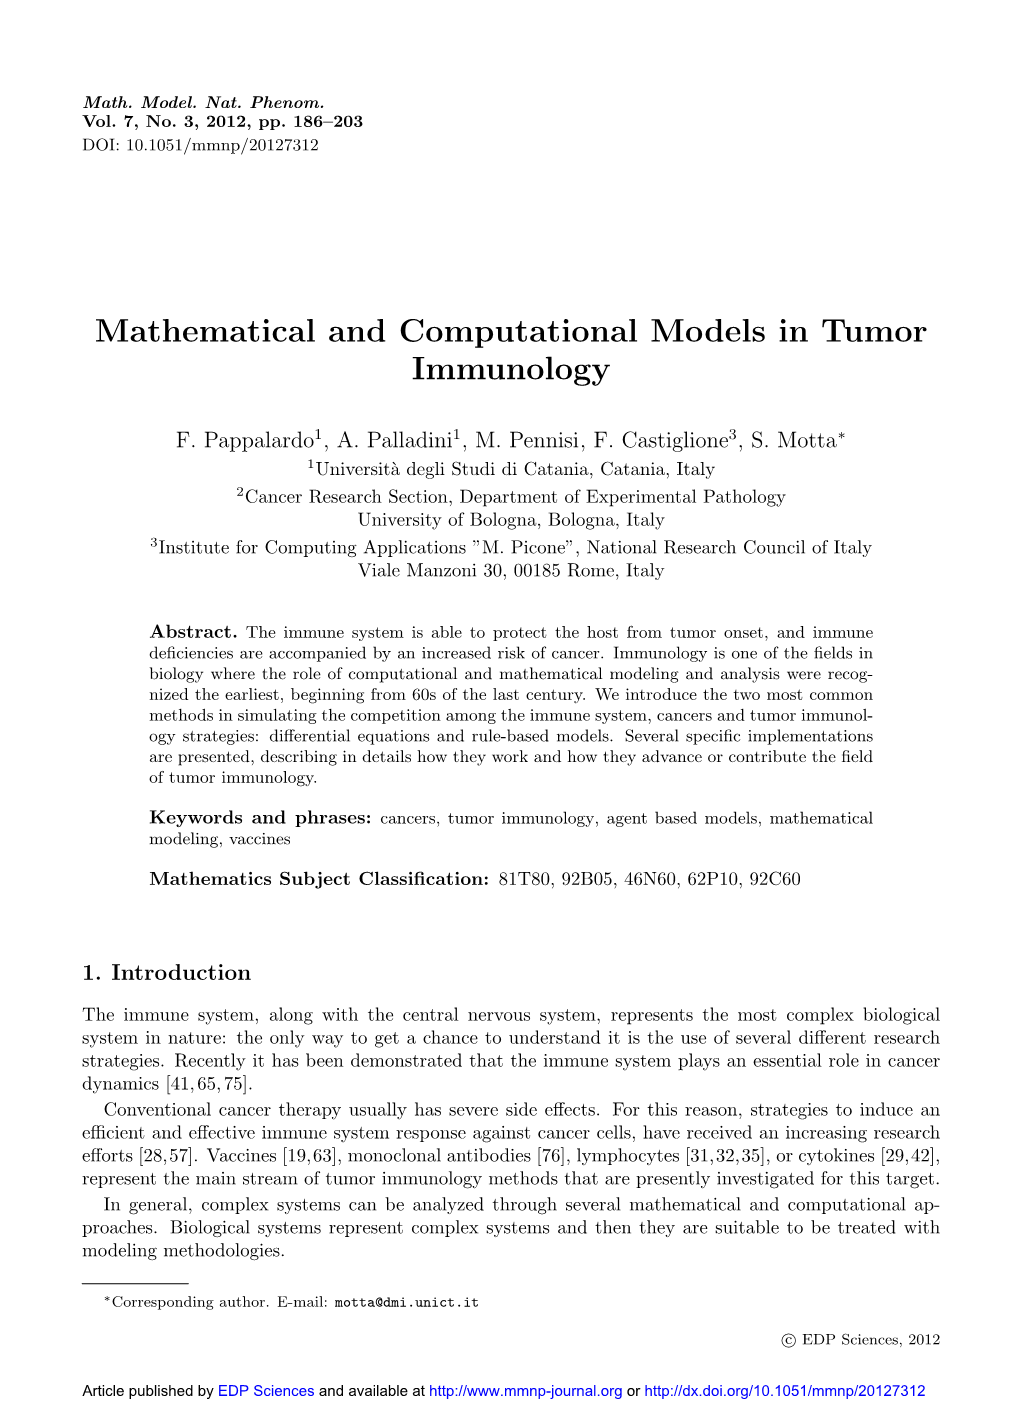 Mathematical and Computational Models in Tumor Immunology